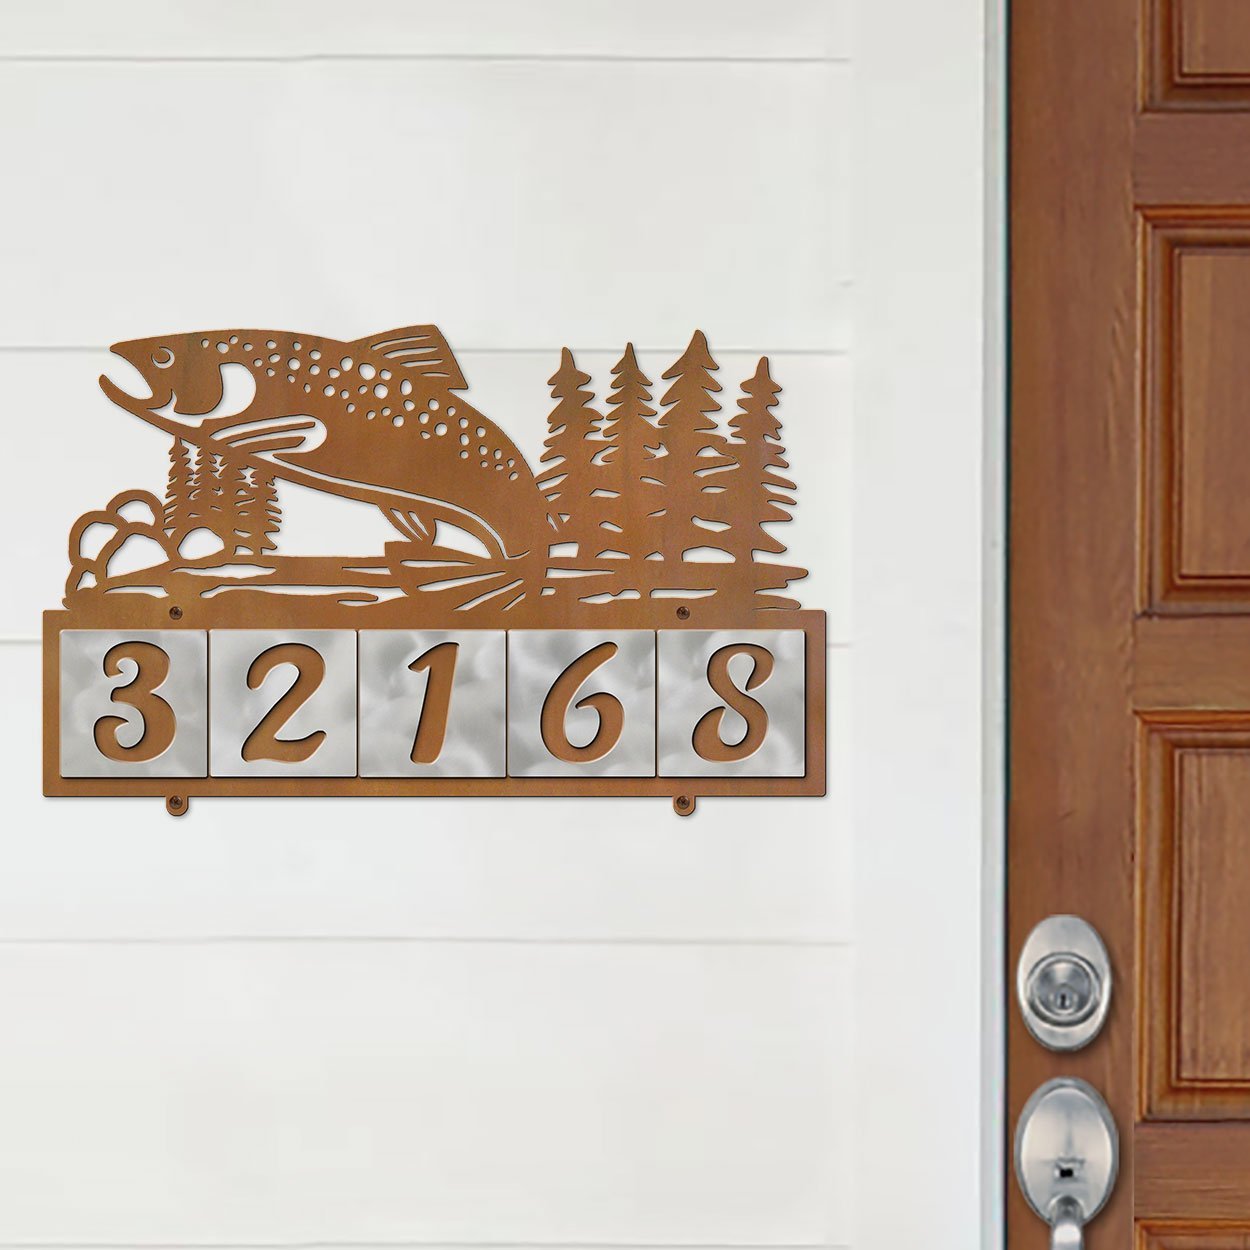 607255 - Jumping Trout in Stream Design 5-Digit Horizontal 4-inch Tile Outdoor House Numbers